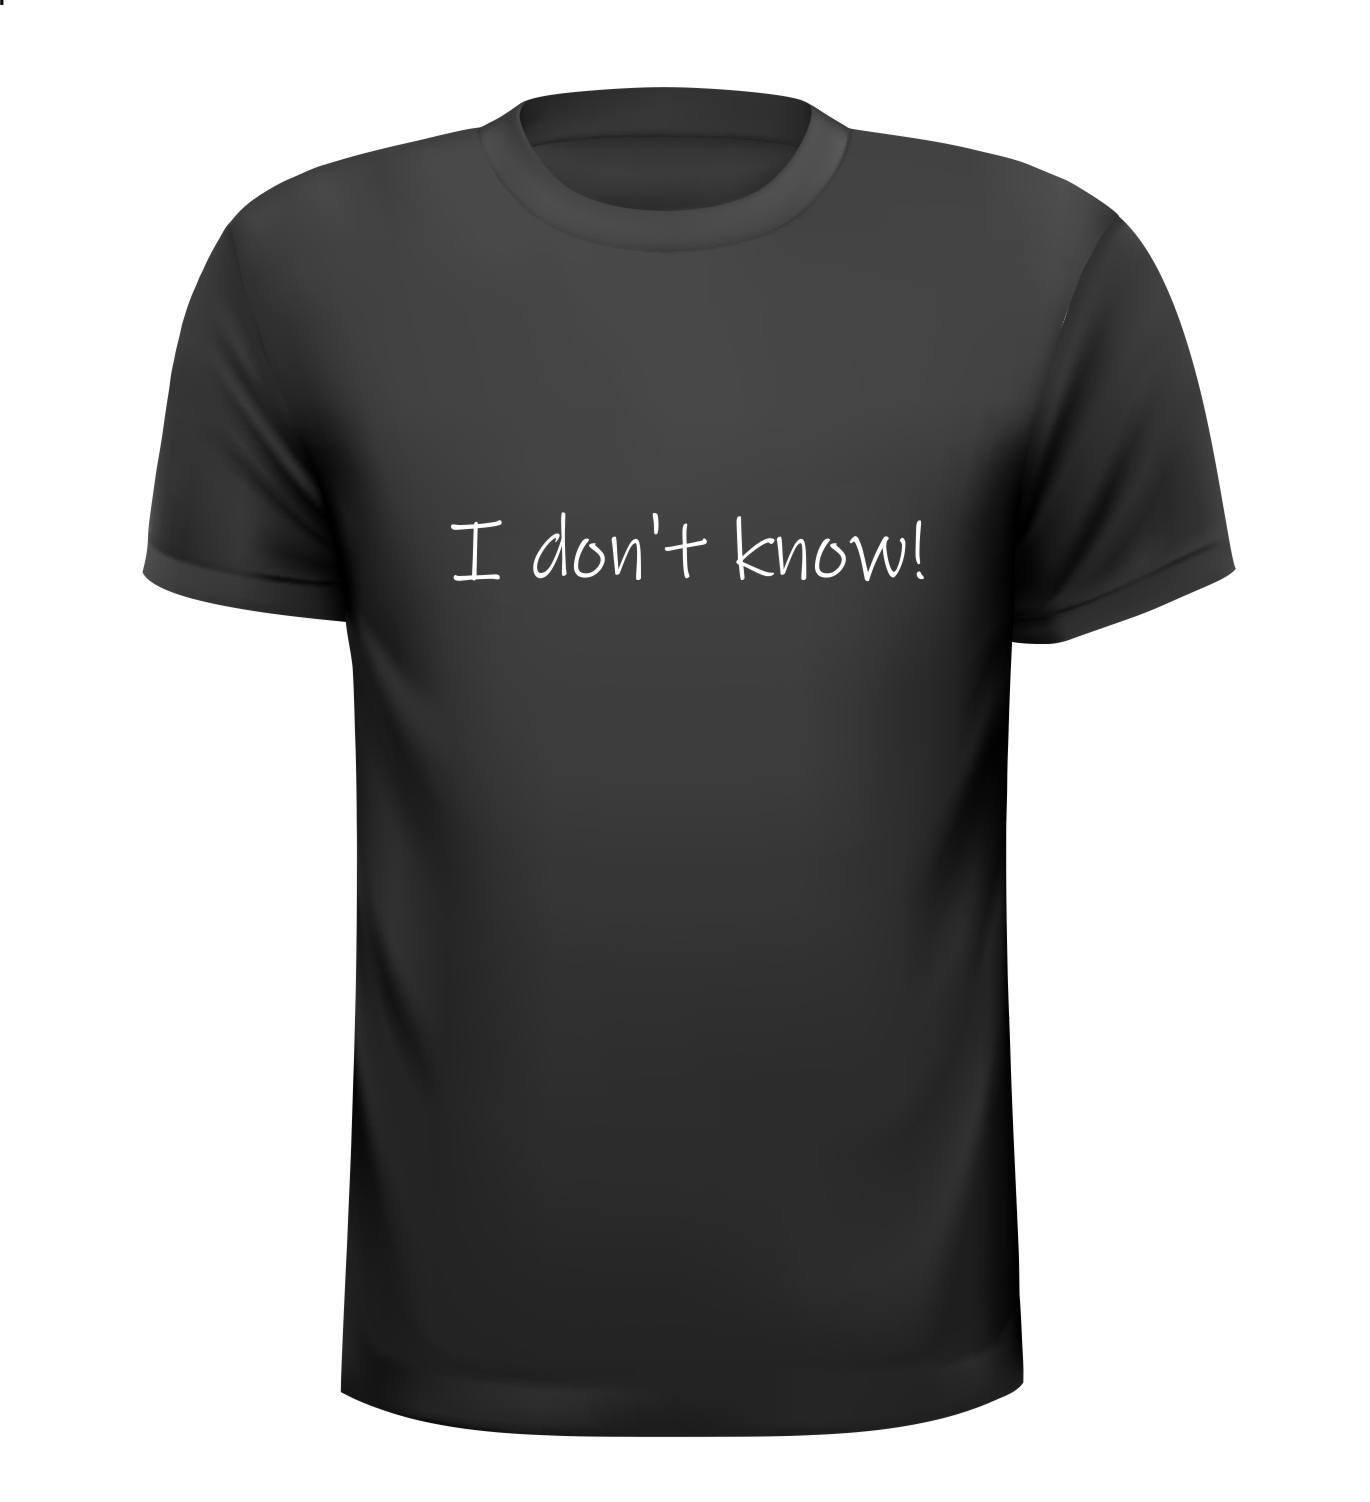 i don't know shirt